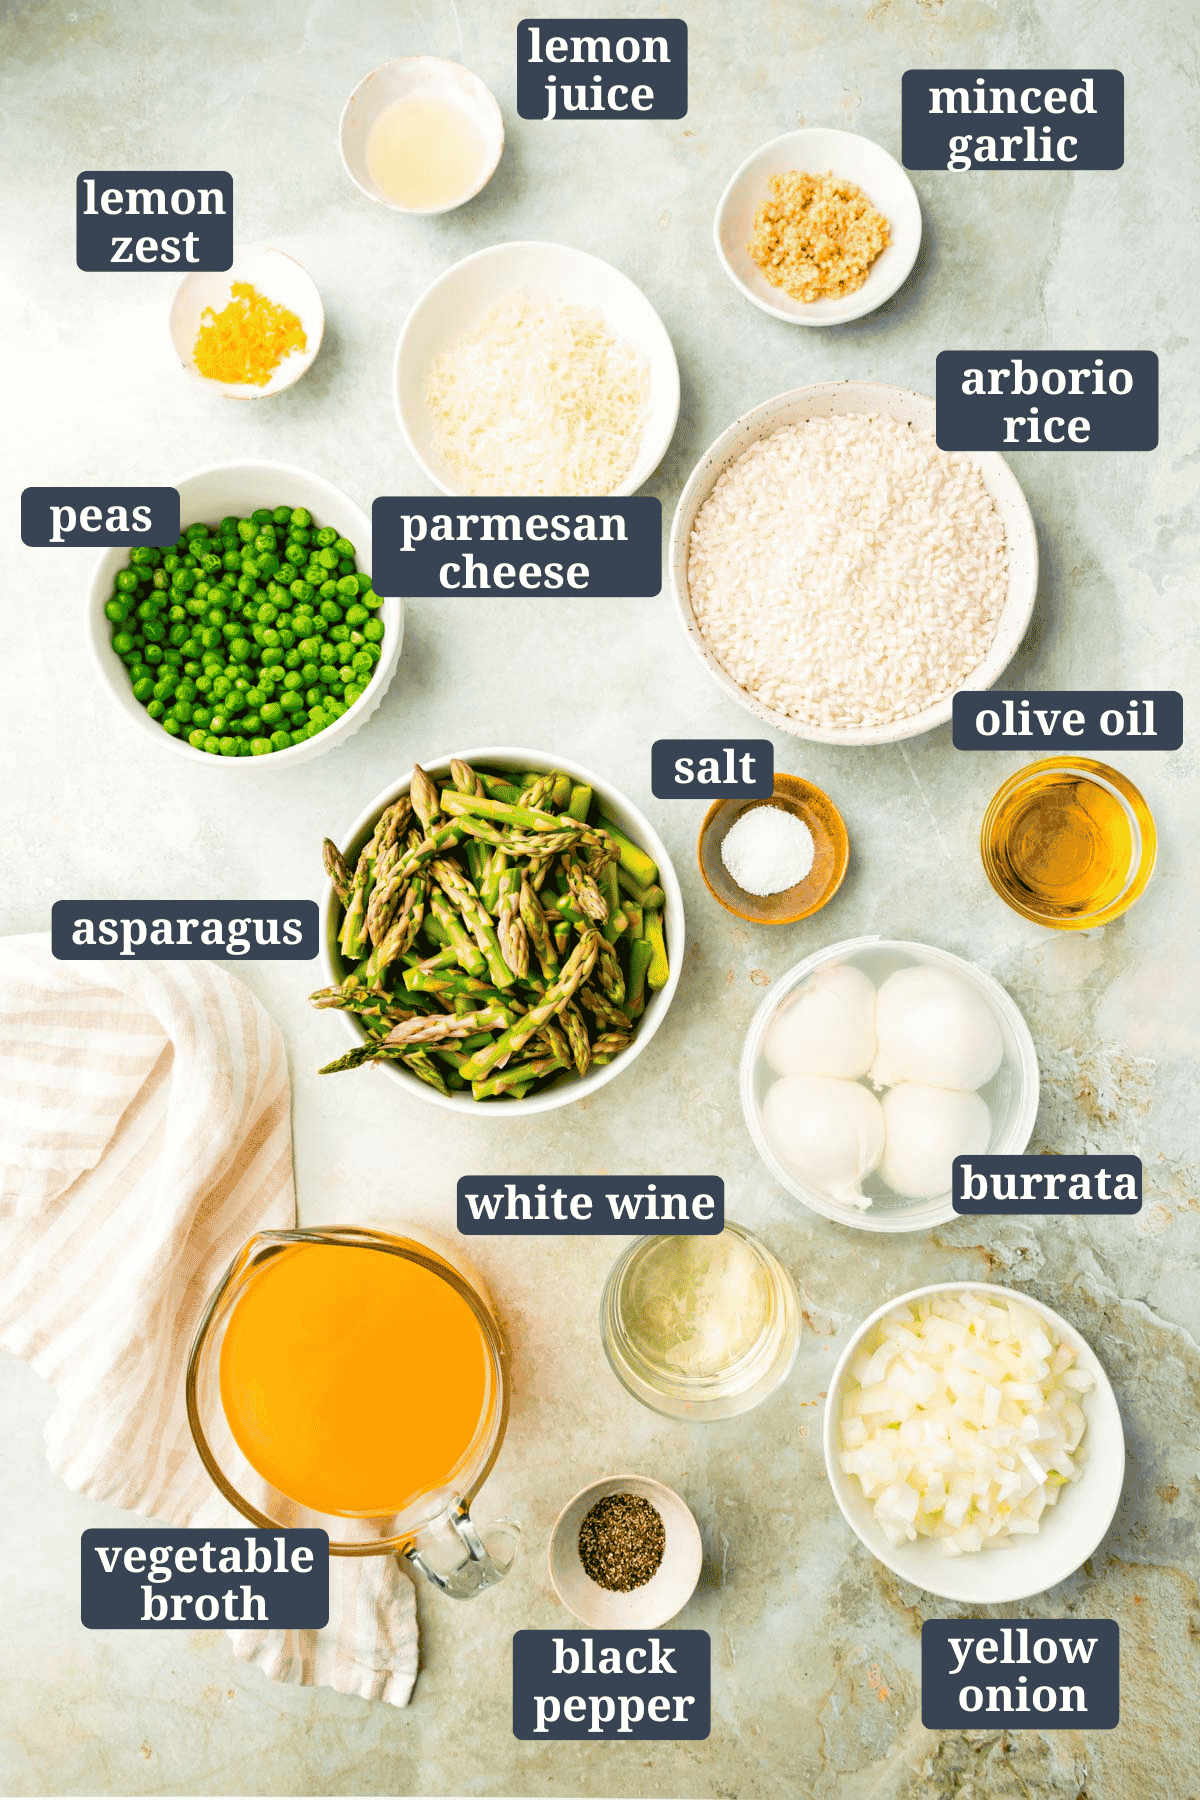 Small bowls on a table filled with ingredients to make pea and asparagus risotto with burrata with text overlay.